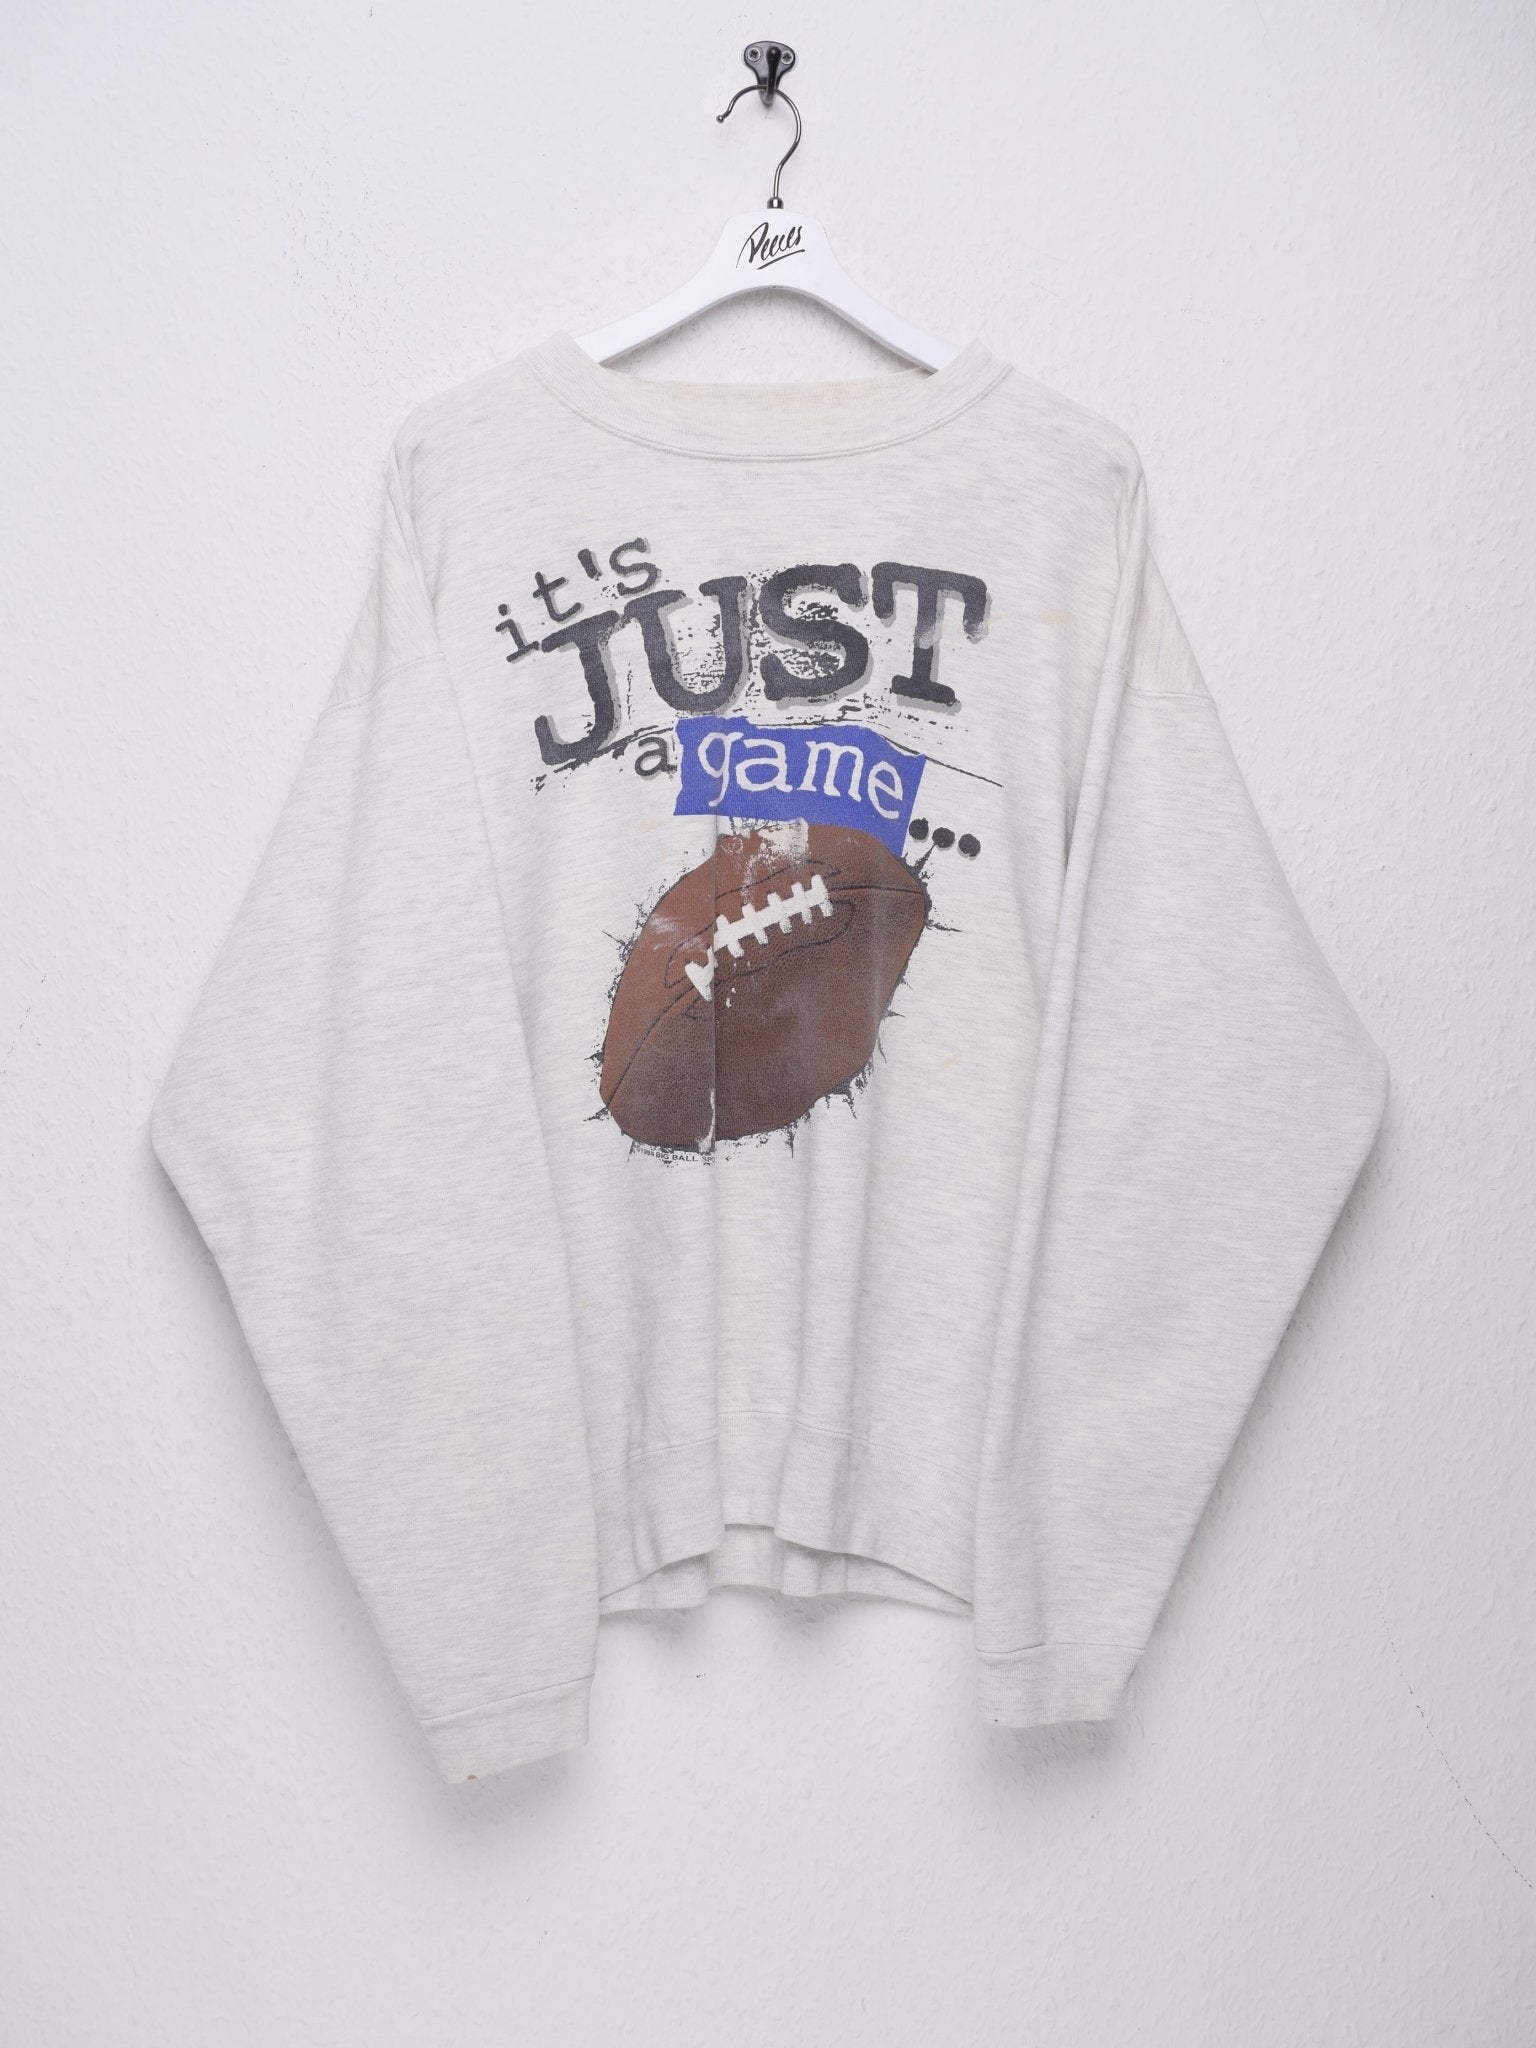 'It's just a Game' printed grey Sweater - Peeces